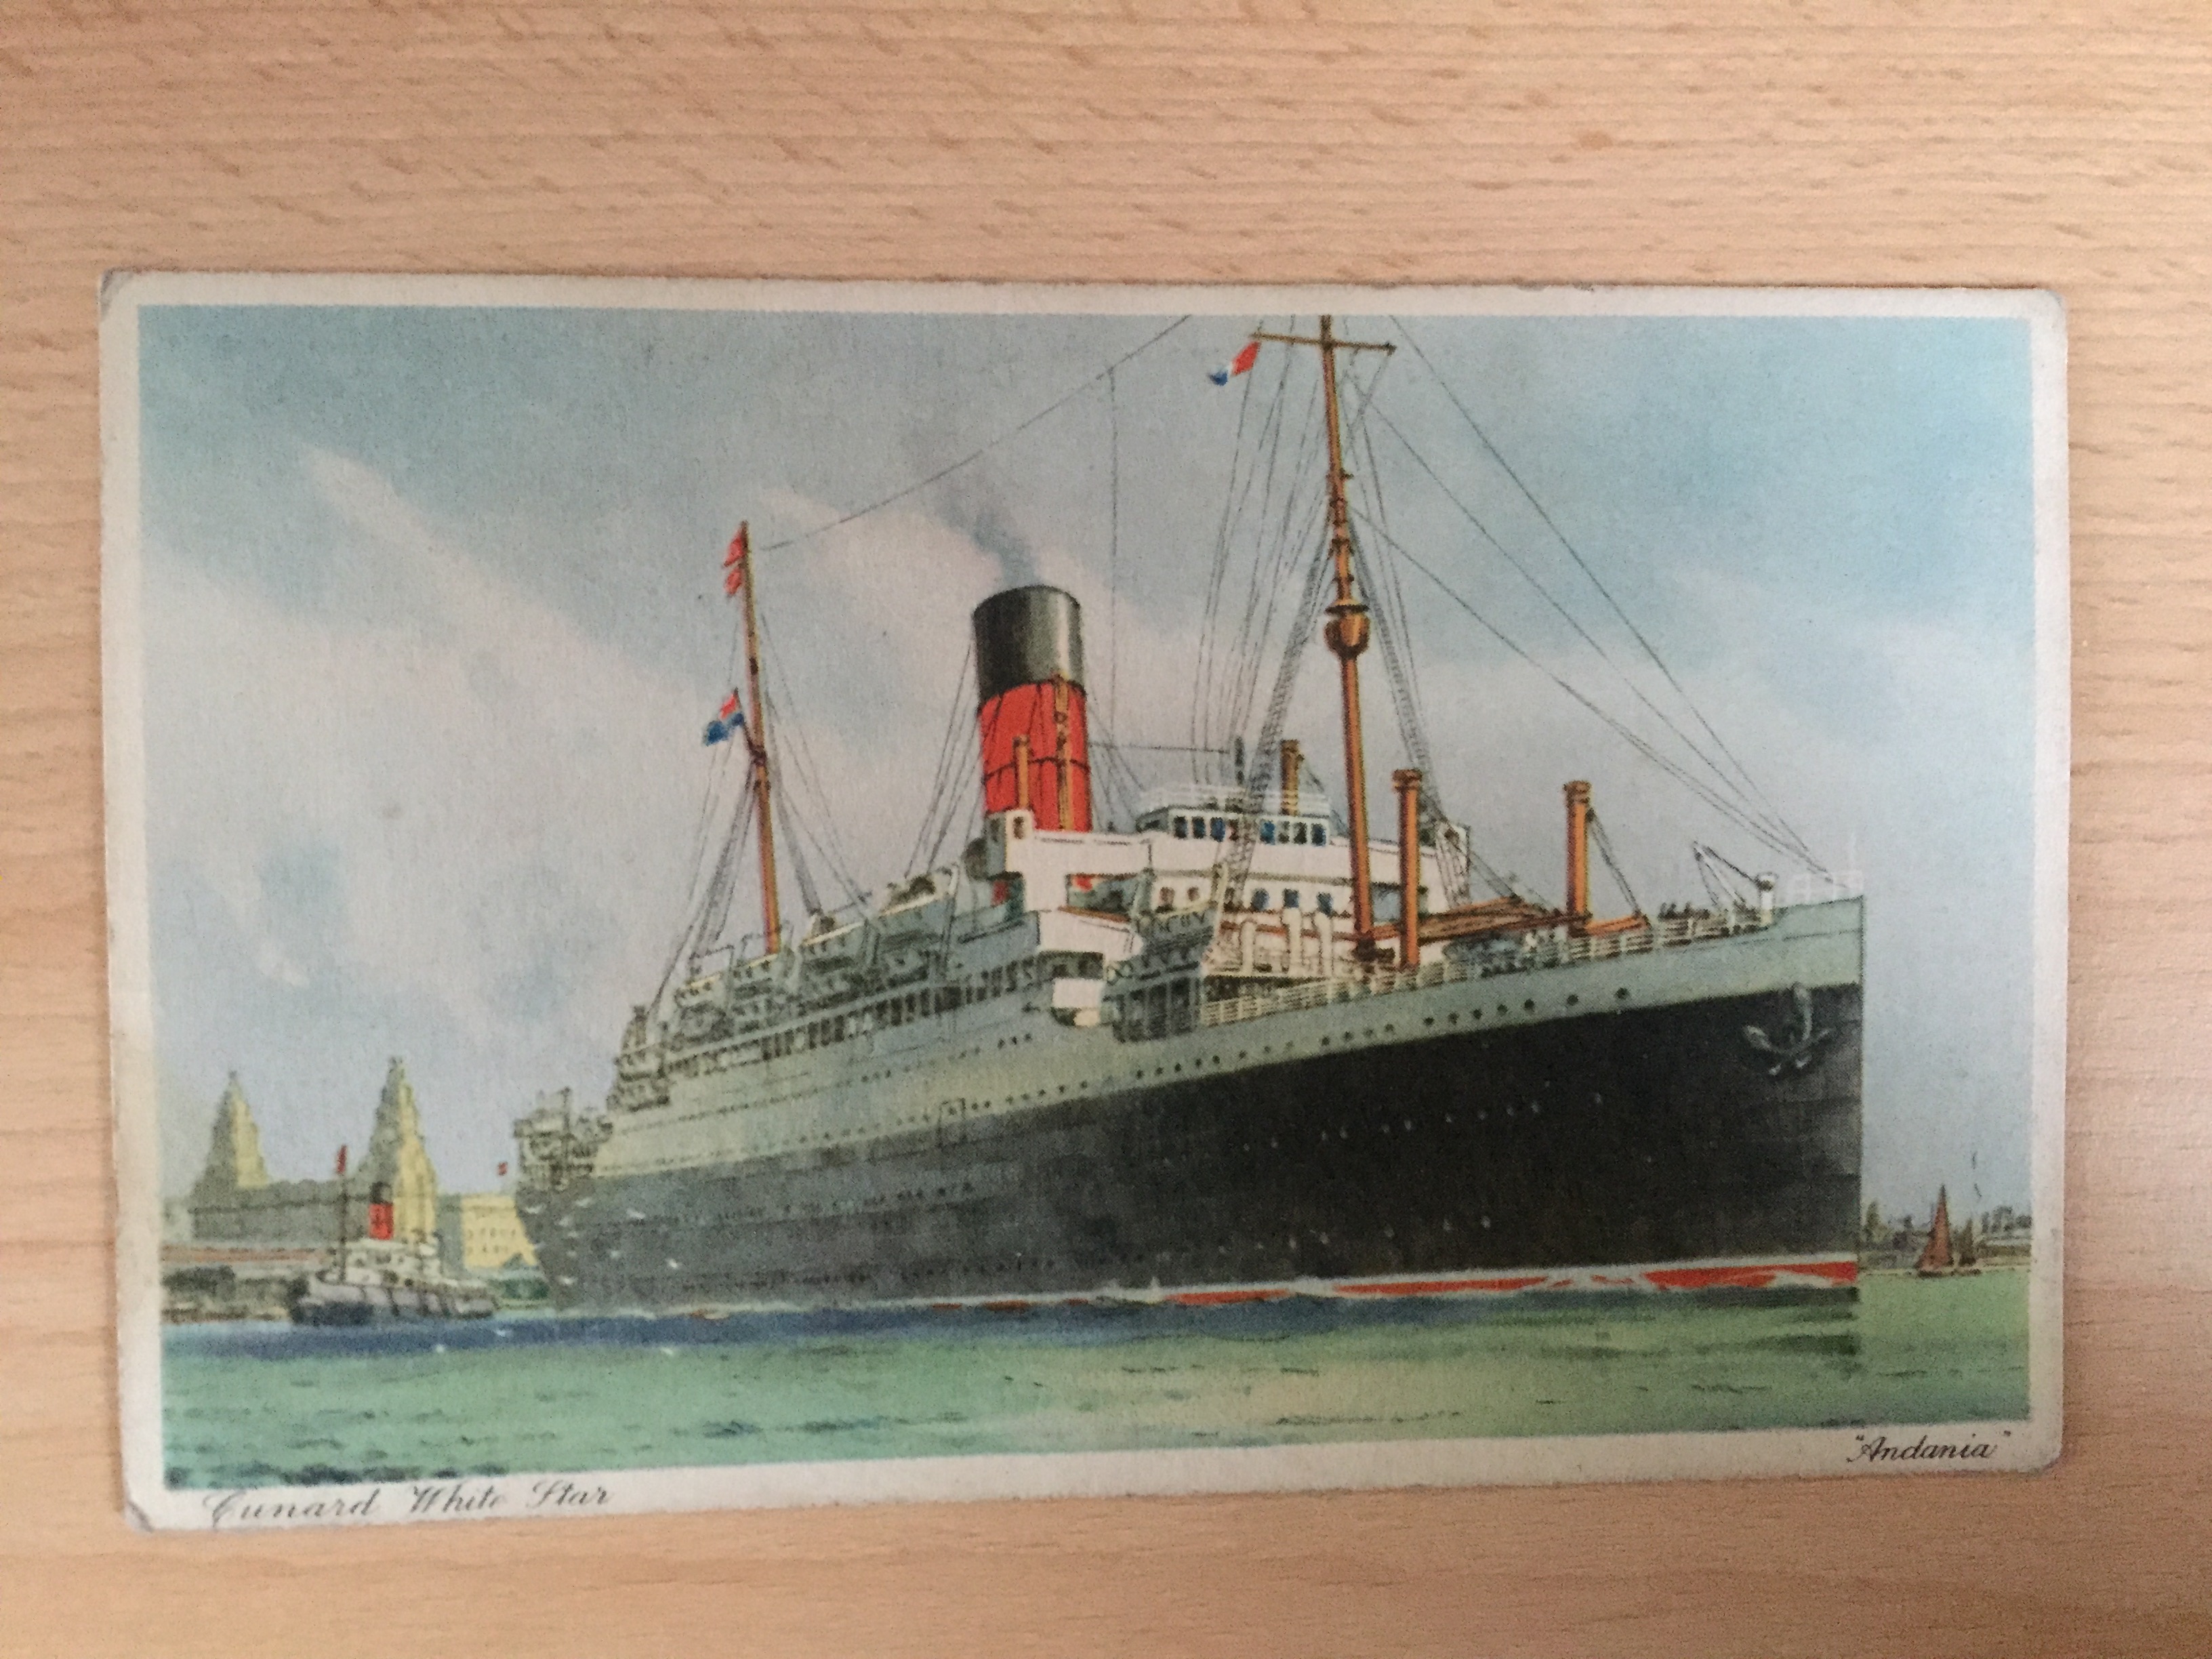 COLOUR POSTCARD FROM THE RMS ANDANIA OF THE CUNARD WHITESTAR LINE